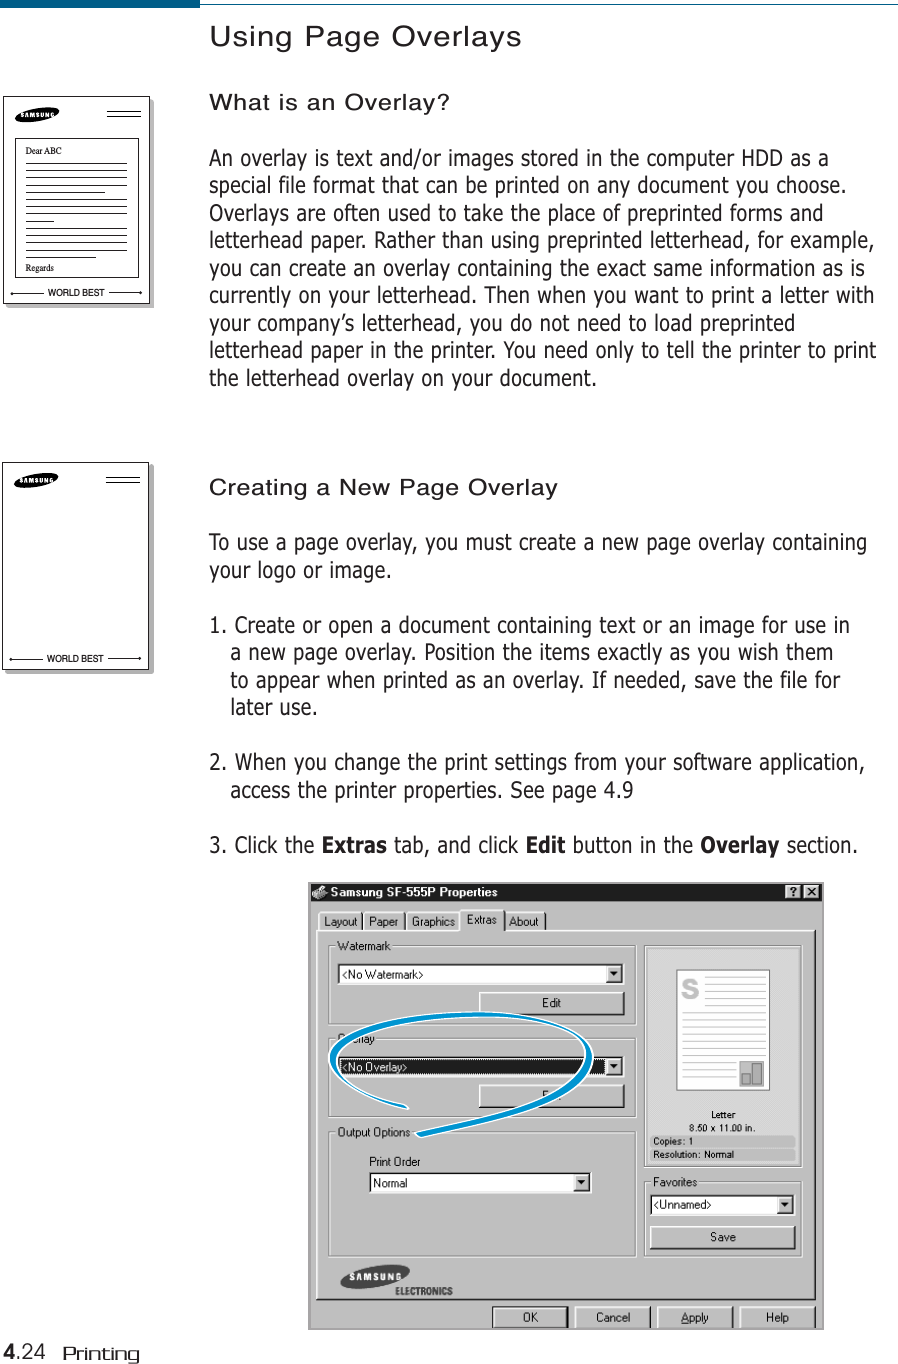 4.24 PrintingWORLD BESTDear ABCRegardsUsing Page OverlaysWhat is an Overlay?An overlay is text and/or images stored in the computer HDD as aspecial file format that can be printed on any document you choose.Overlays are often used to take the place of preprinted forms andletterhead paper. Rather than using preprinted letterhead, for example,you can create an overlay containing the exact same information as iscurrently on your letterhead. Then when you want to print a letter withyour company’s letterhead, you do not need to load preprintedletterhead paper in the printer. You need only to tell the printer to printthe letterhead overlay on your document.Creating a New Page OverlayTo use a page overlay, you must create a new page overlay containingyour logo or image.1. Create or open a document containing text or an image for use ina new page overlay. Position the items exactly as you wish them to appear when printed as an overlay. If needed, save the file forlater use.2. When you change the print settings from your software application, access the printer properties. See page 4.93. Click the Extras tab, and click Edit button in the Overlay section. WORLD BEST